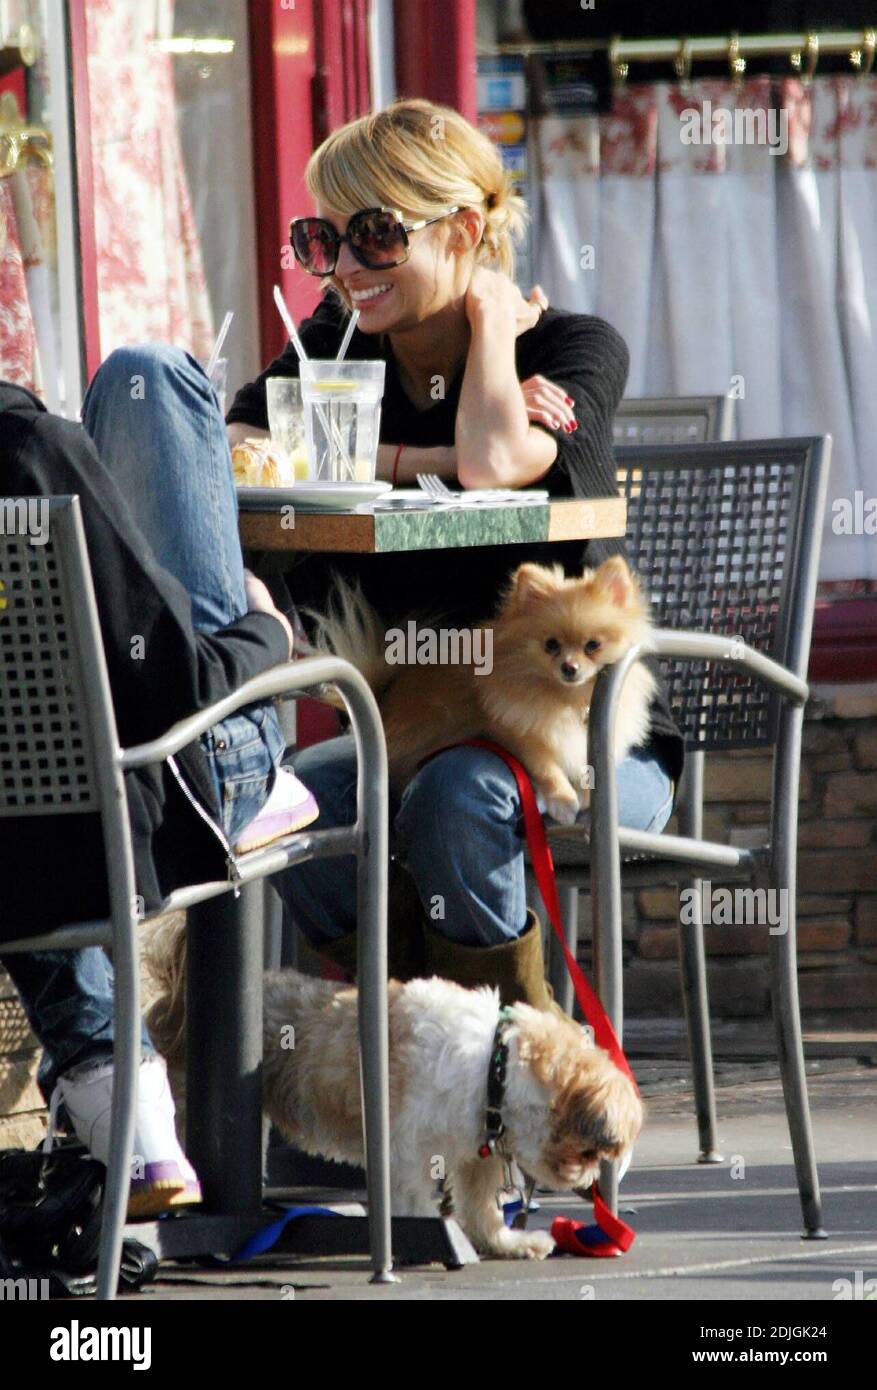 Exclusive!! Nicole Richie takes her two dogs Foxy Cleopatra and Honey Child along for lunch with her friends at La Conversacion in Beverly Hills, Ca. Richie spent most of the meal fussing over her two pooches, petting and feeding them. 1/29/06 Stock Photo